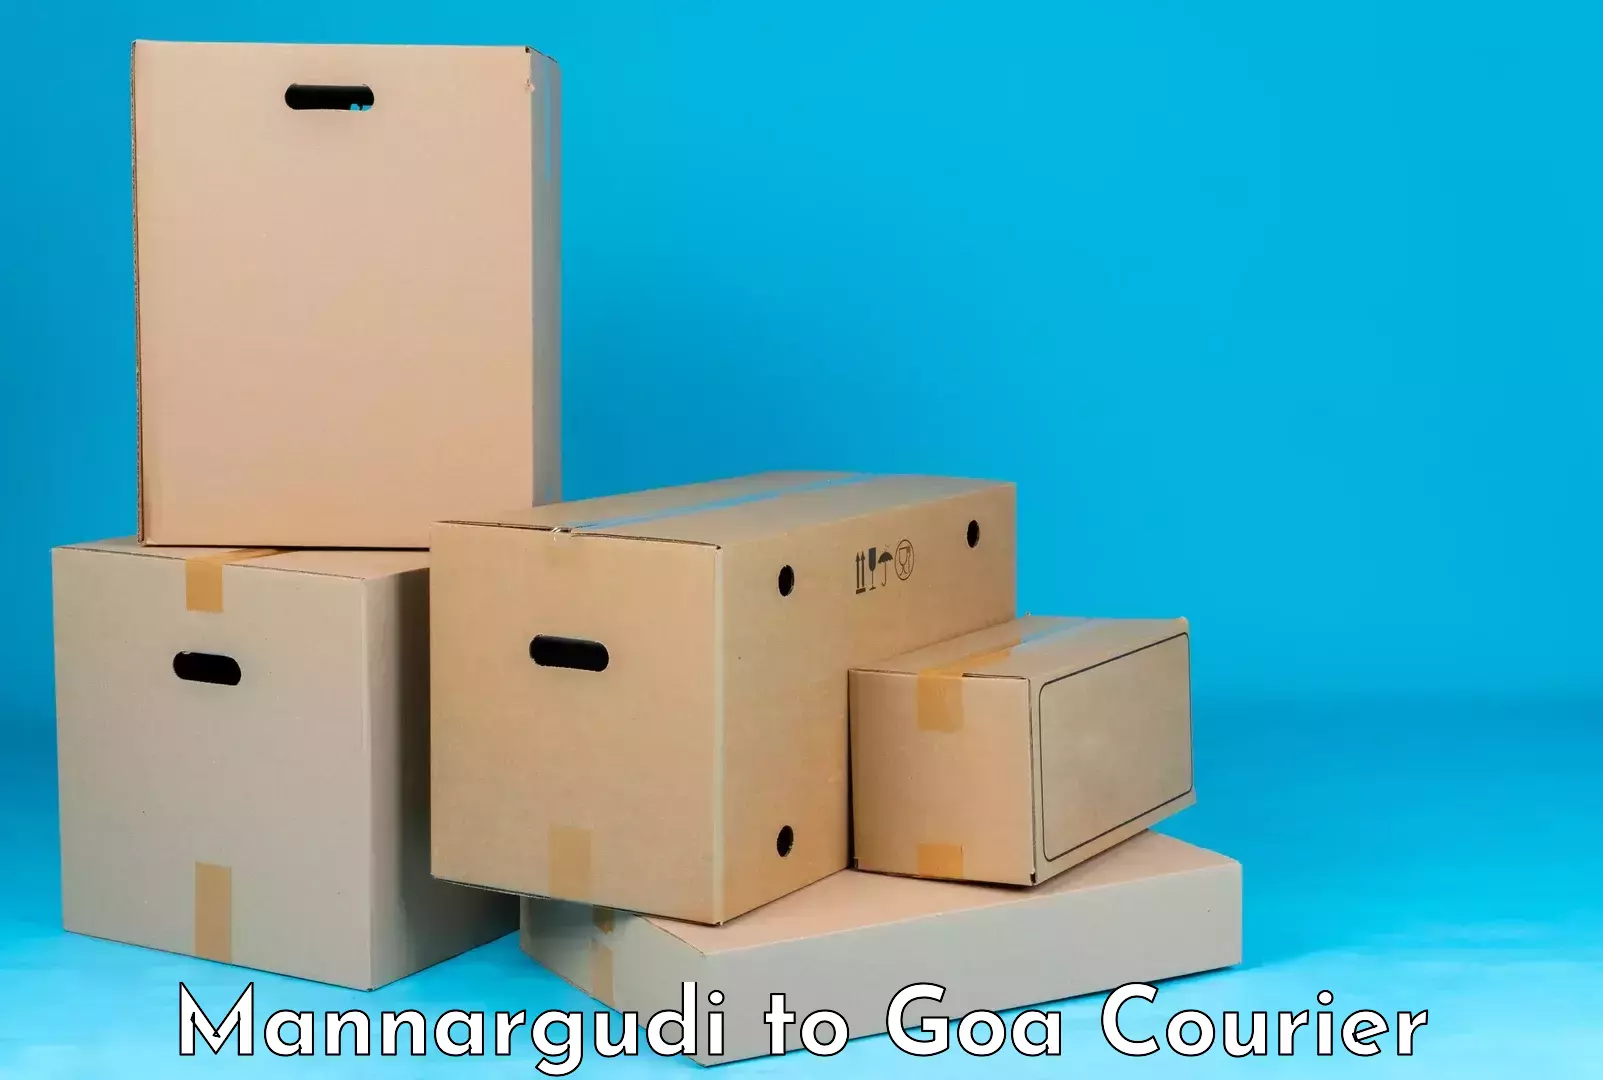 Luggage delivery system Mannargudi to IIT Goa